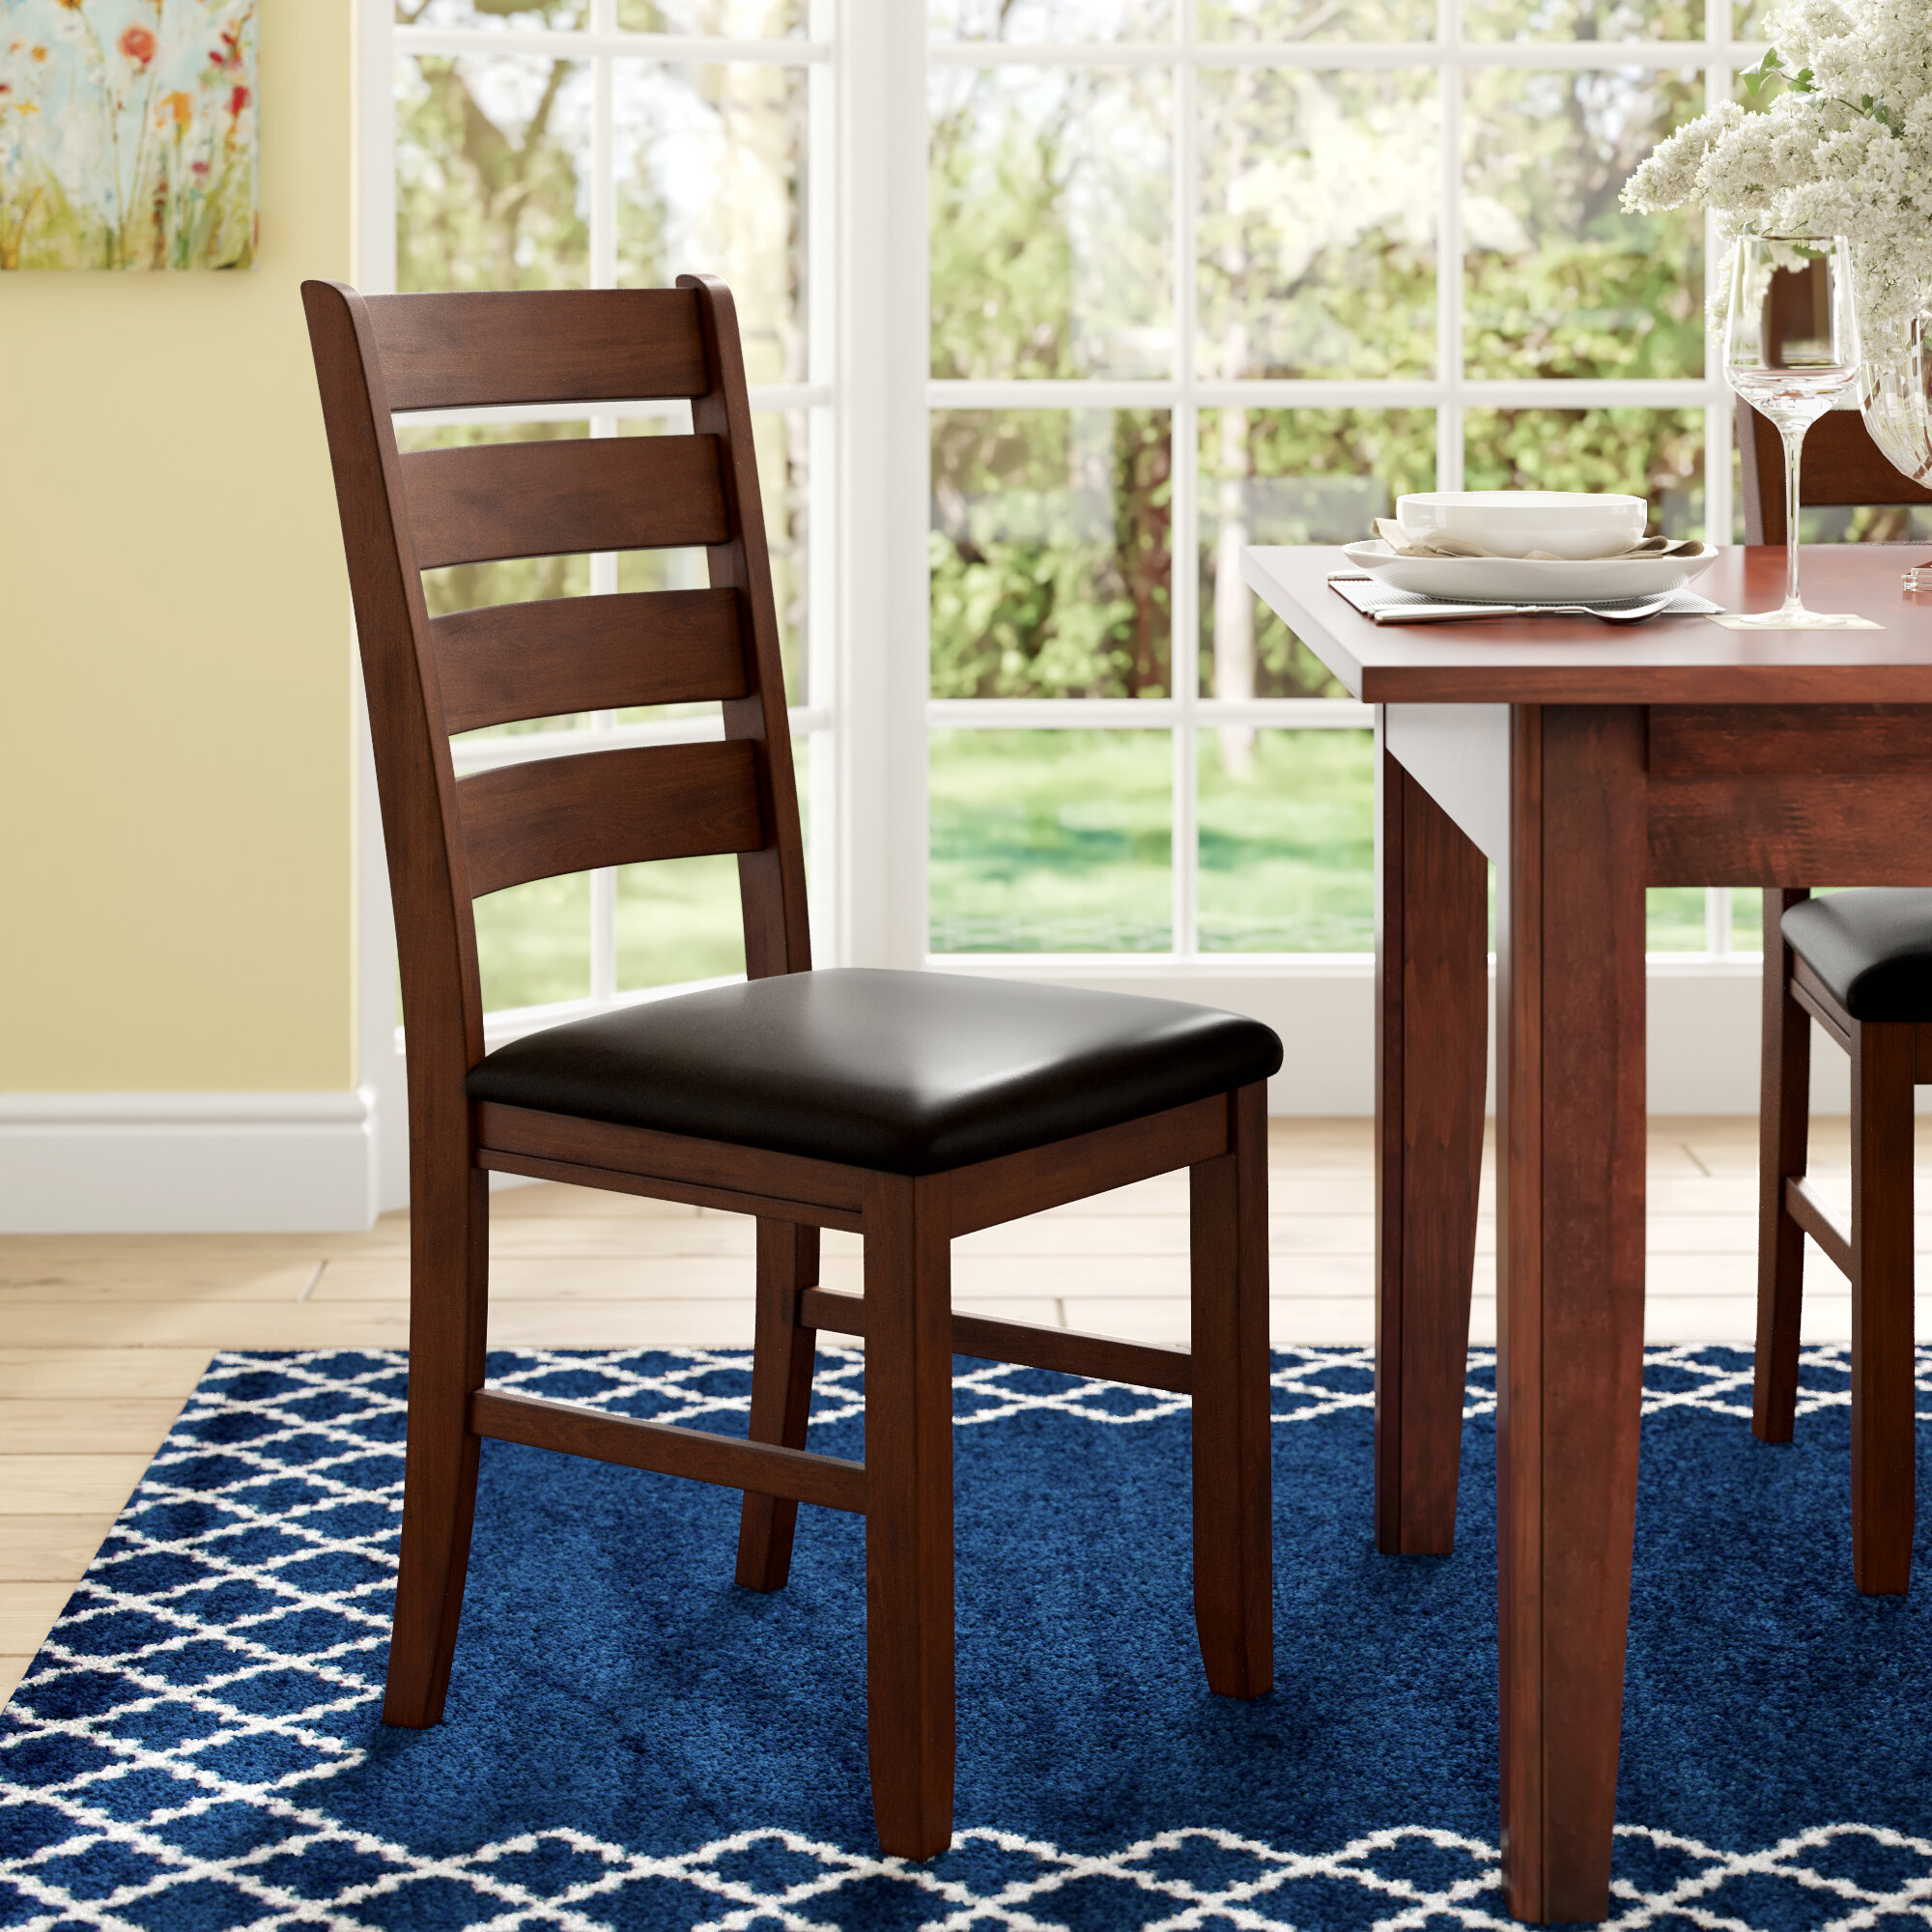 Leather And Wood Dining Chairs - Dining room ideas